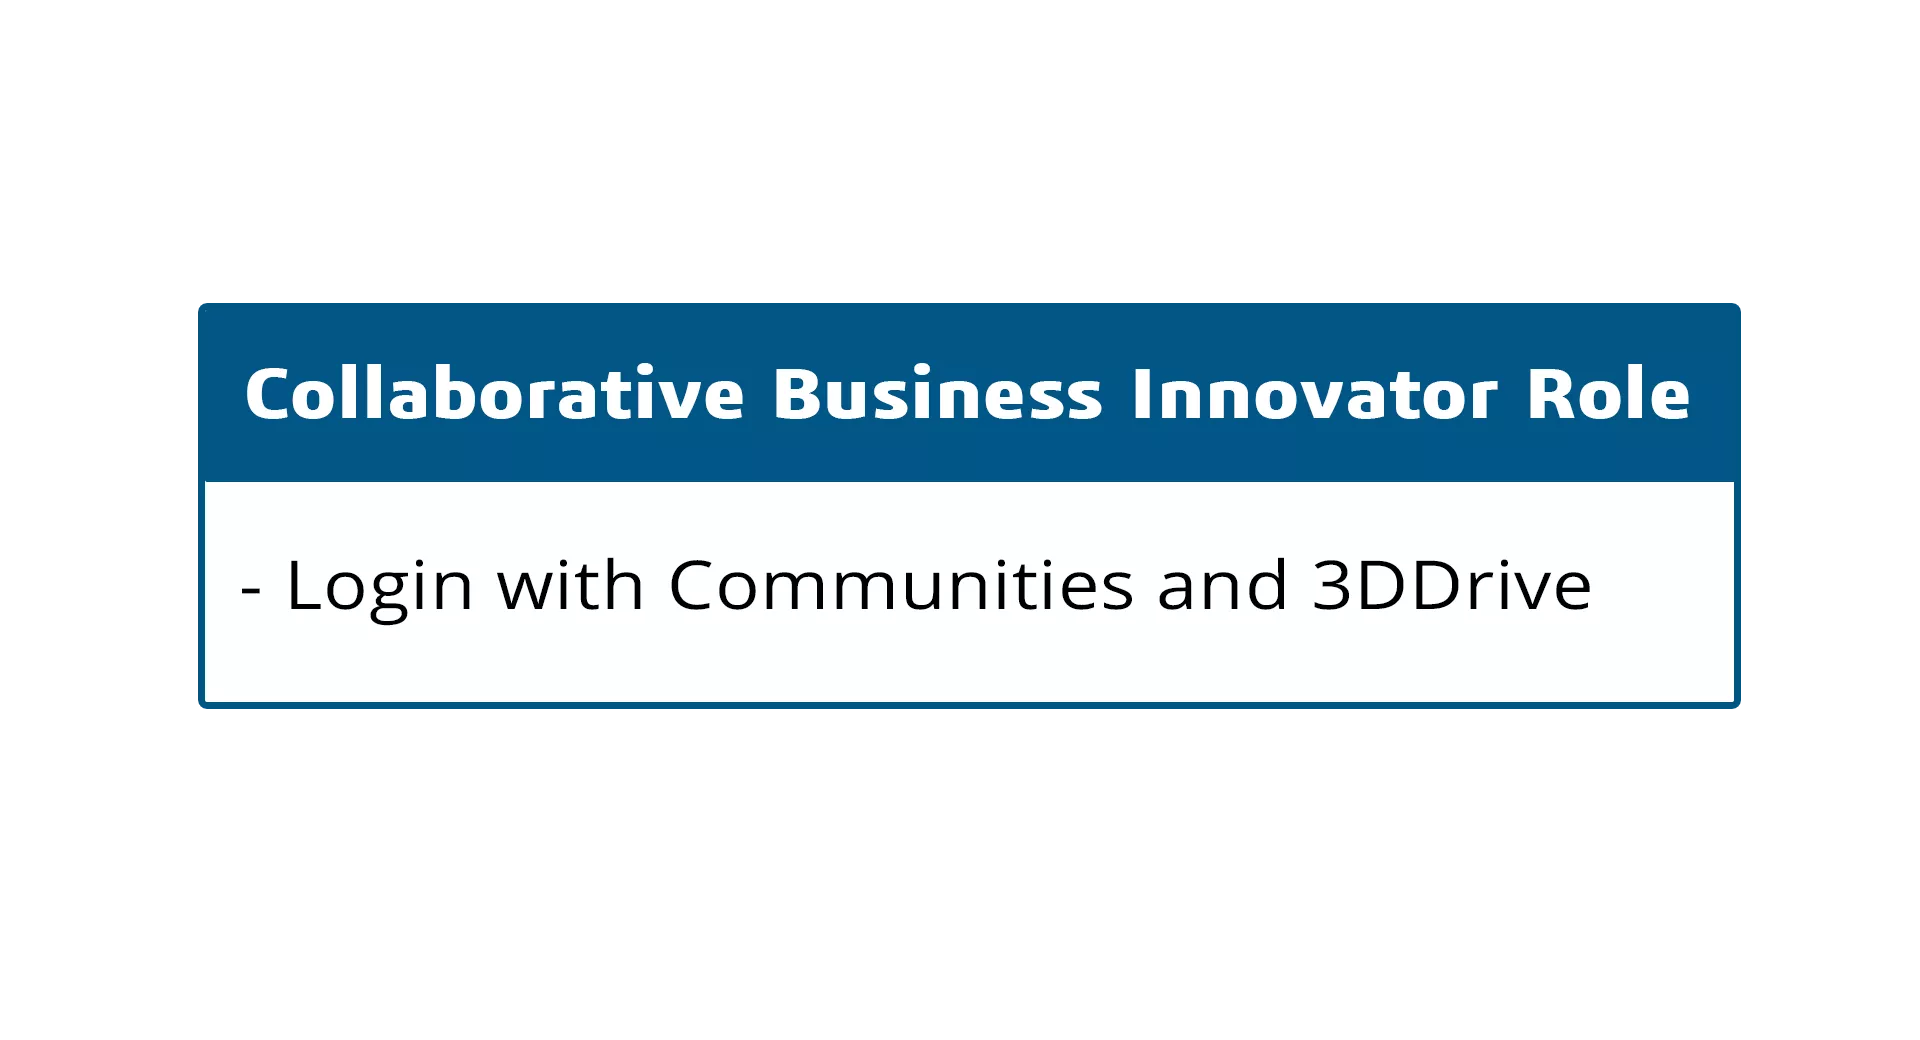 Collaborative Business Innovator Role in the 3DEXPERIENCE Platform